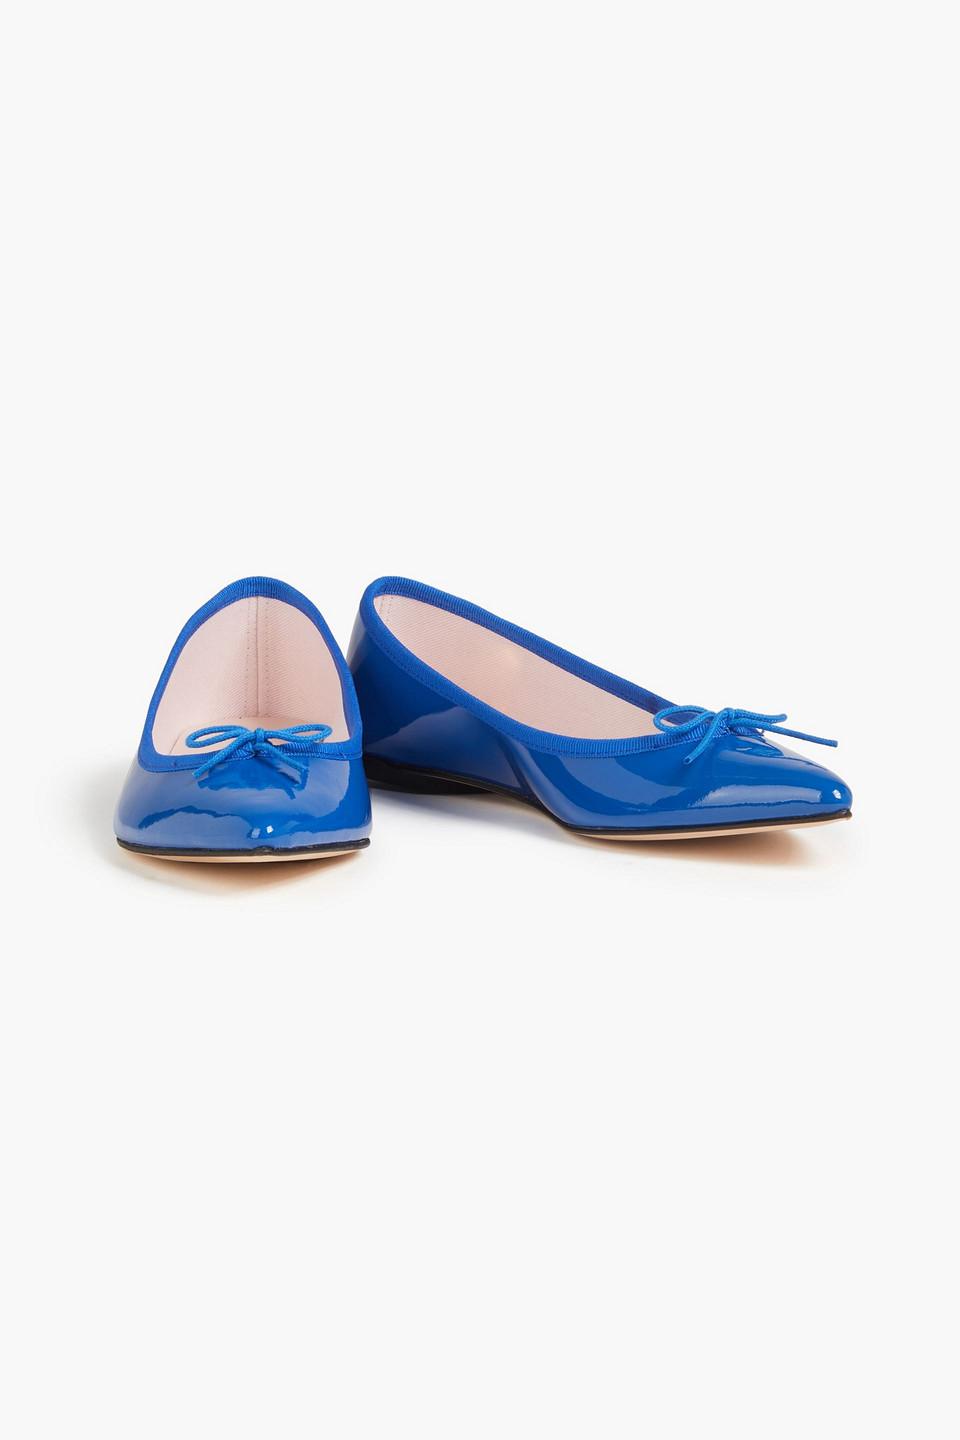 Repetto Brigitte Patent-leather Point-toe Flats in Blue | Lyst